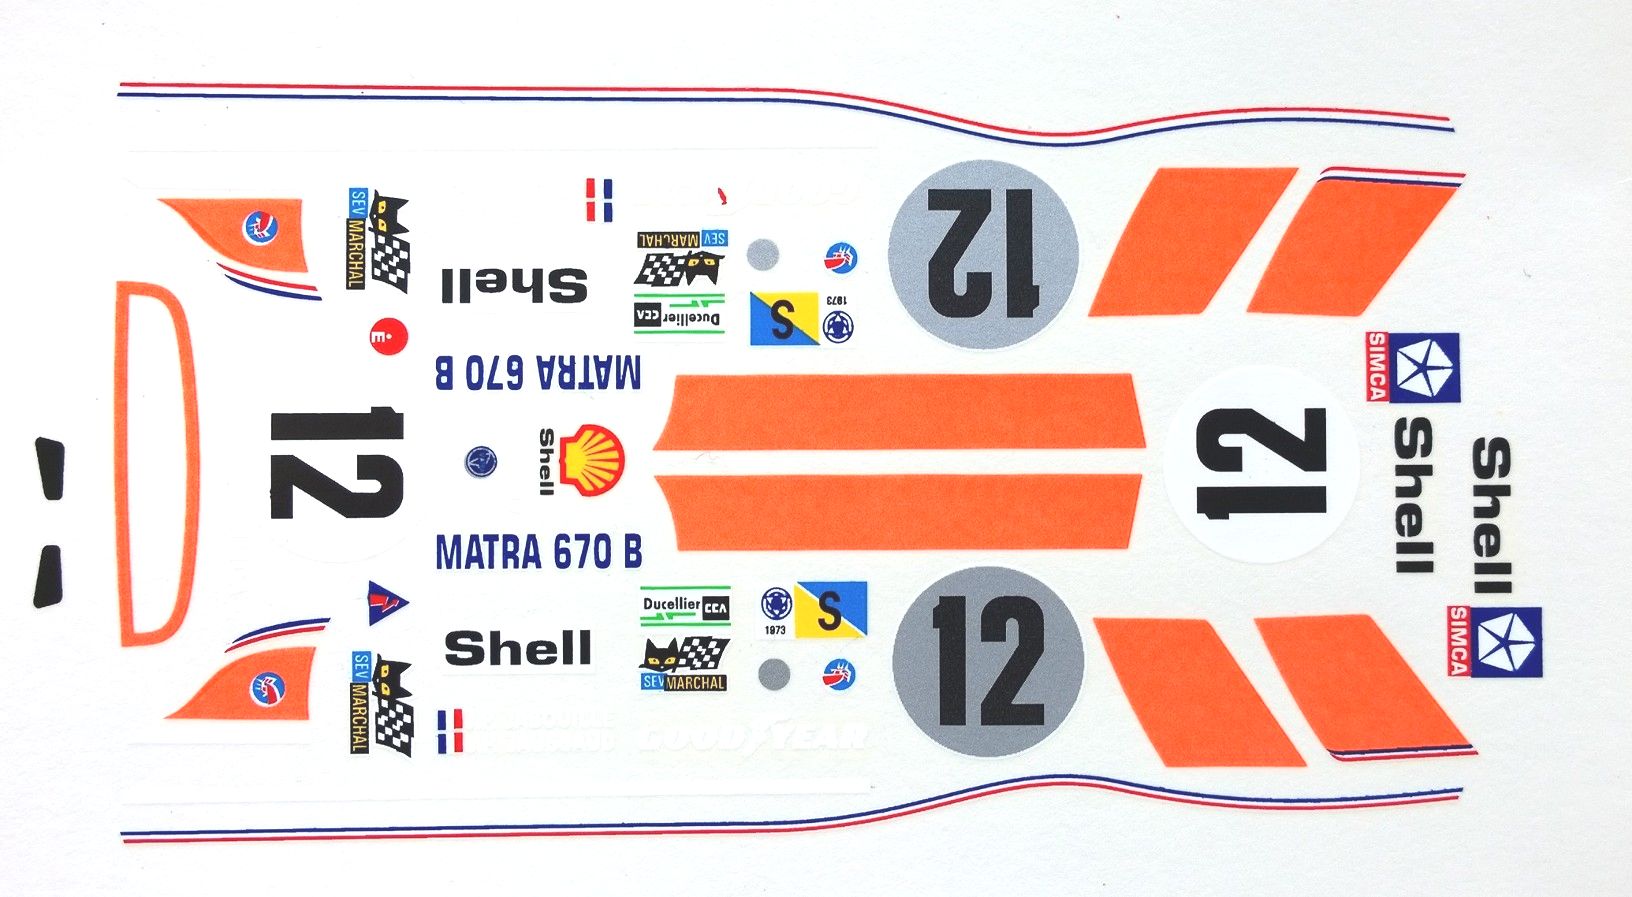 SLOT CAR SCALEXTRIC 1/32nd scale Race stickers decals 